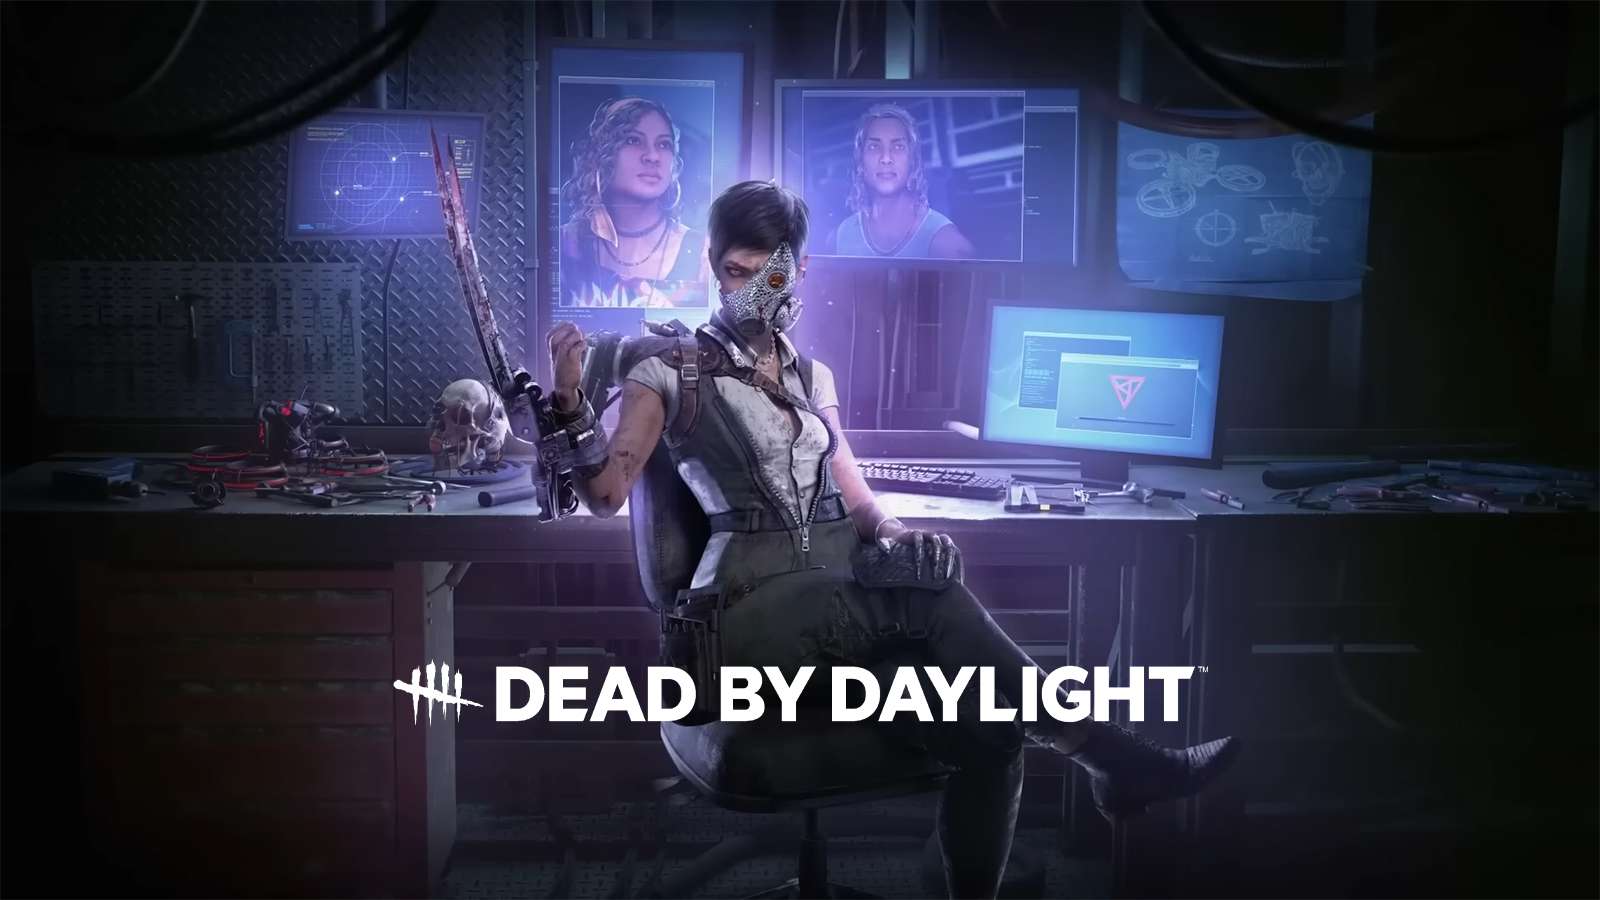 Key art featuring the Skull Merchant with the Dead by Daylight logo